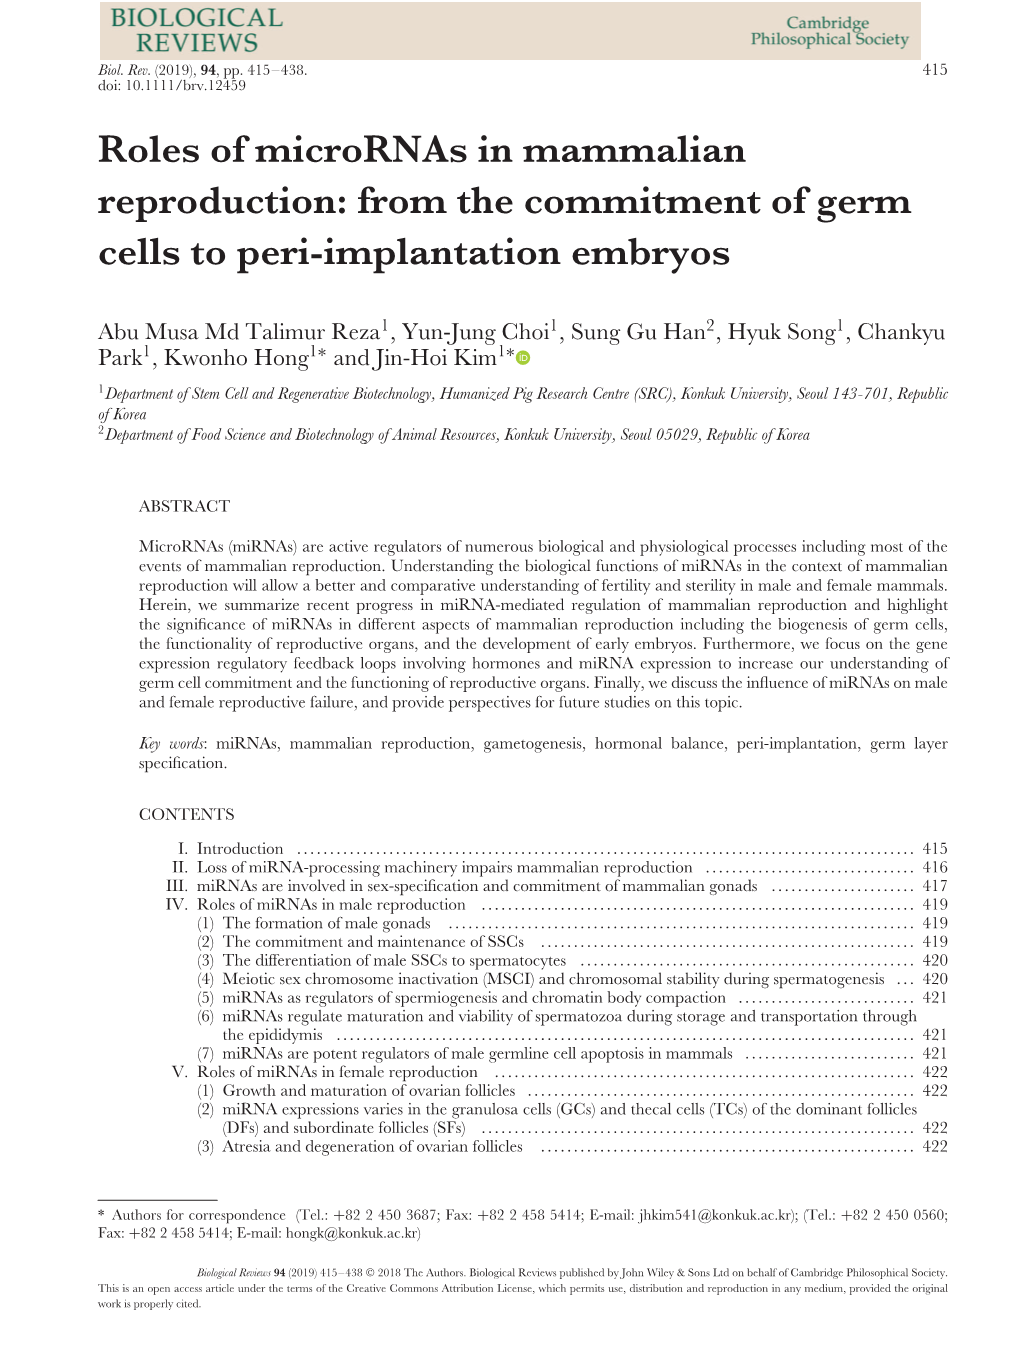 Roles of Micrornas in Mammalian Reproduction: from the Commitment of Germ Cells to Peri-Implantation Embryos